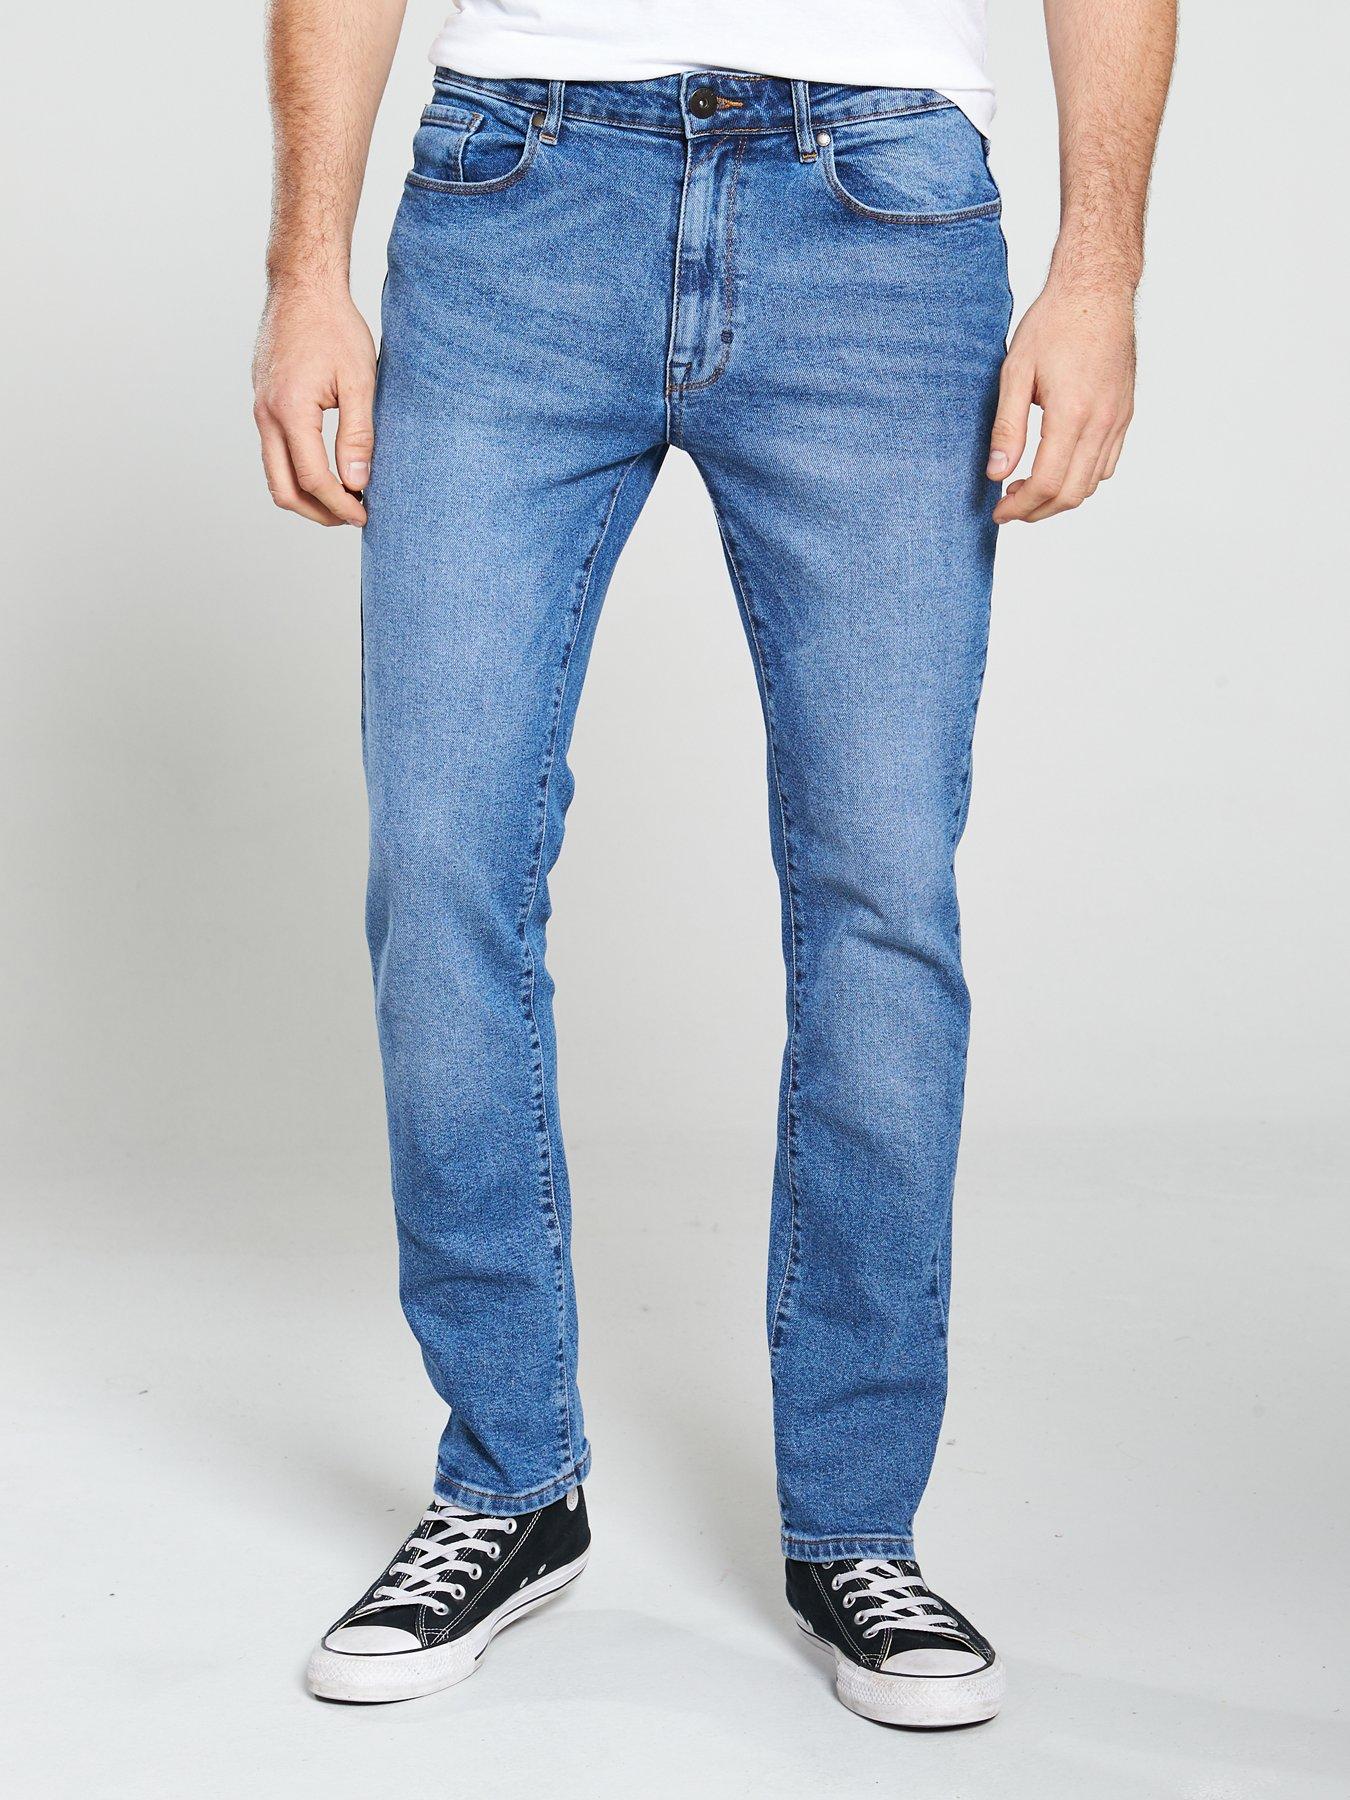 size 42 skinny fit jeans